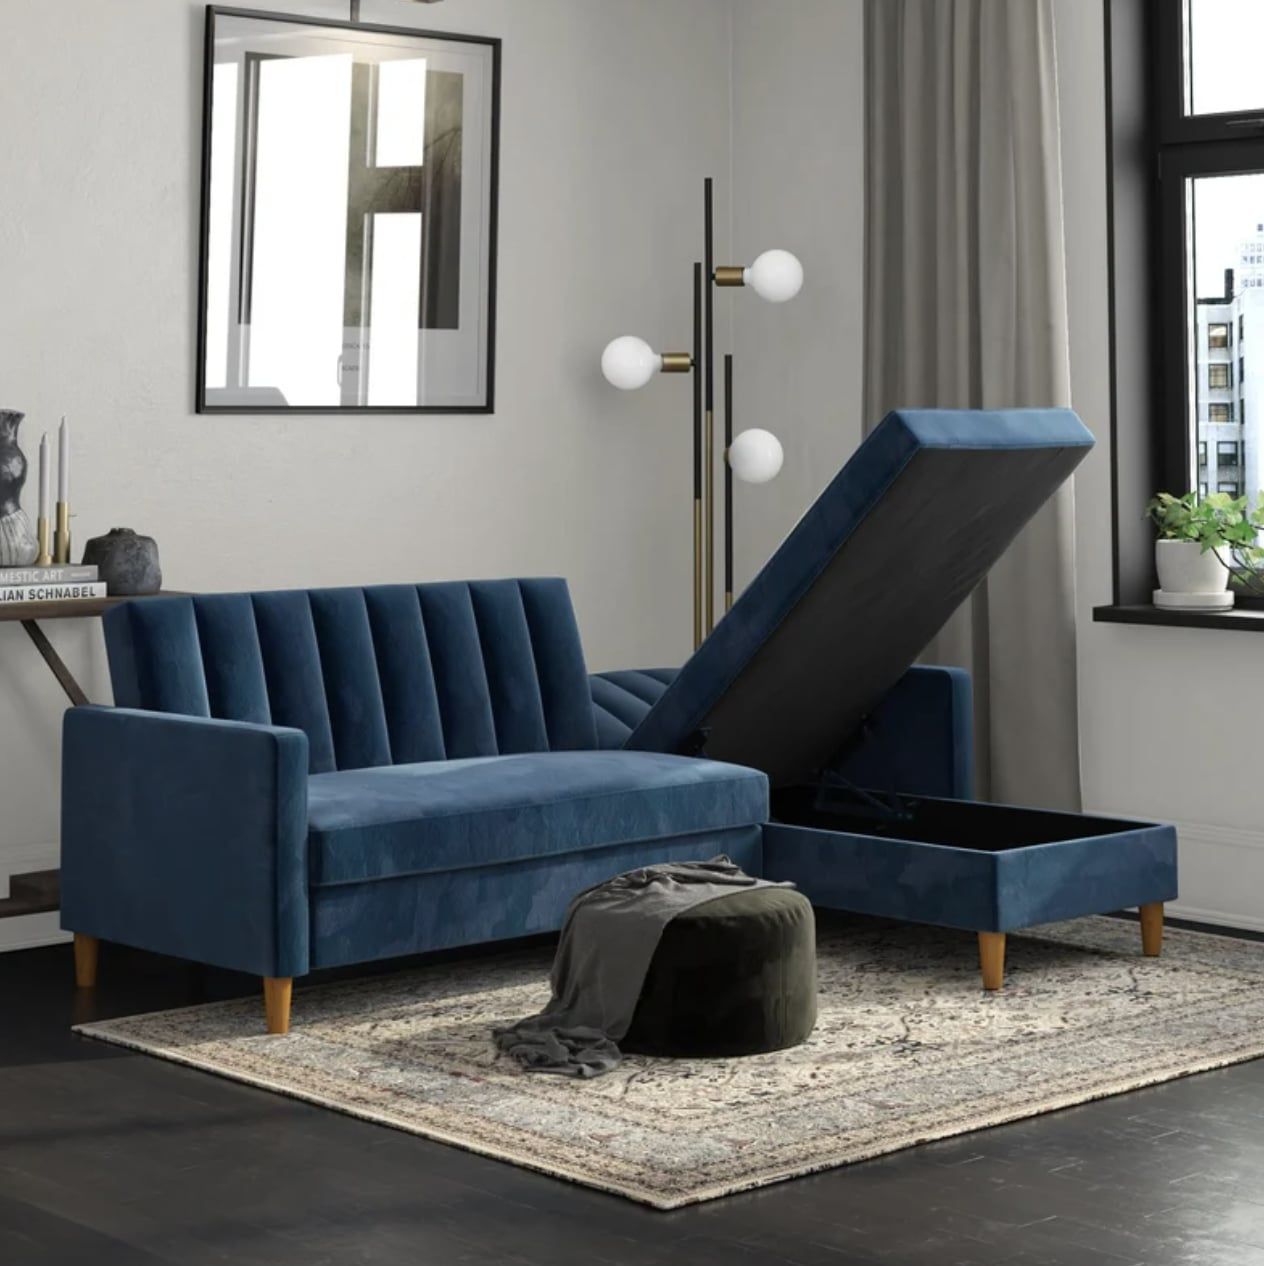 Best And Most Comfortable Sofas With Storage 2022 | Popsugar Home Pertaining To Convertible Sofa With Matching Chaise (View 14 of 20)